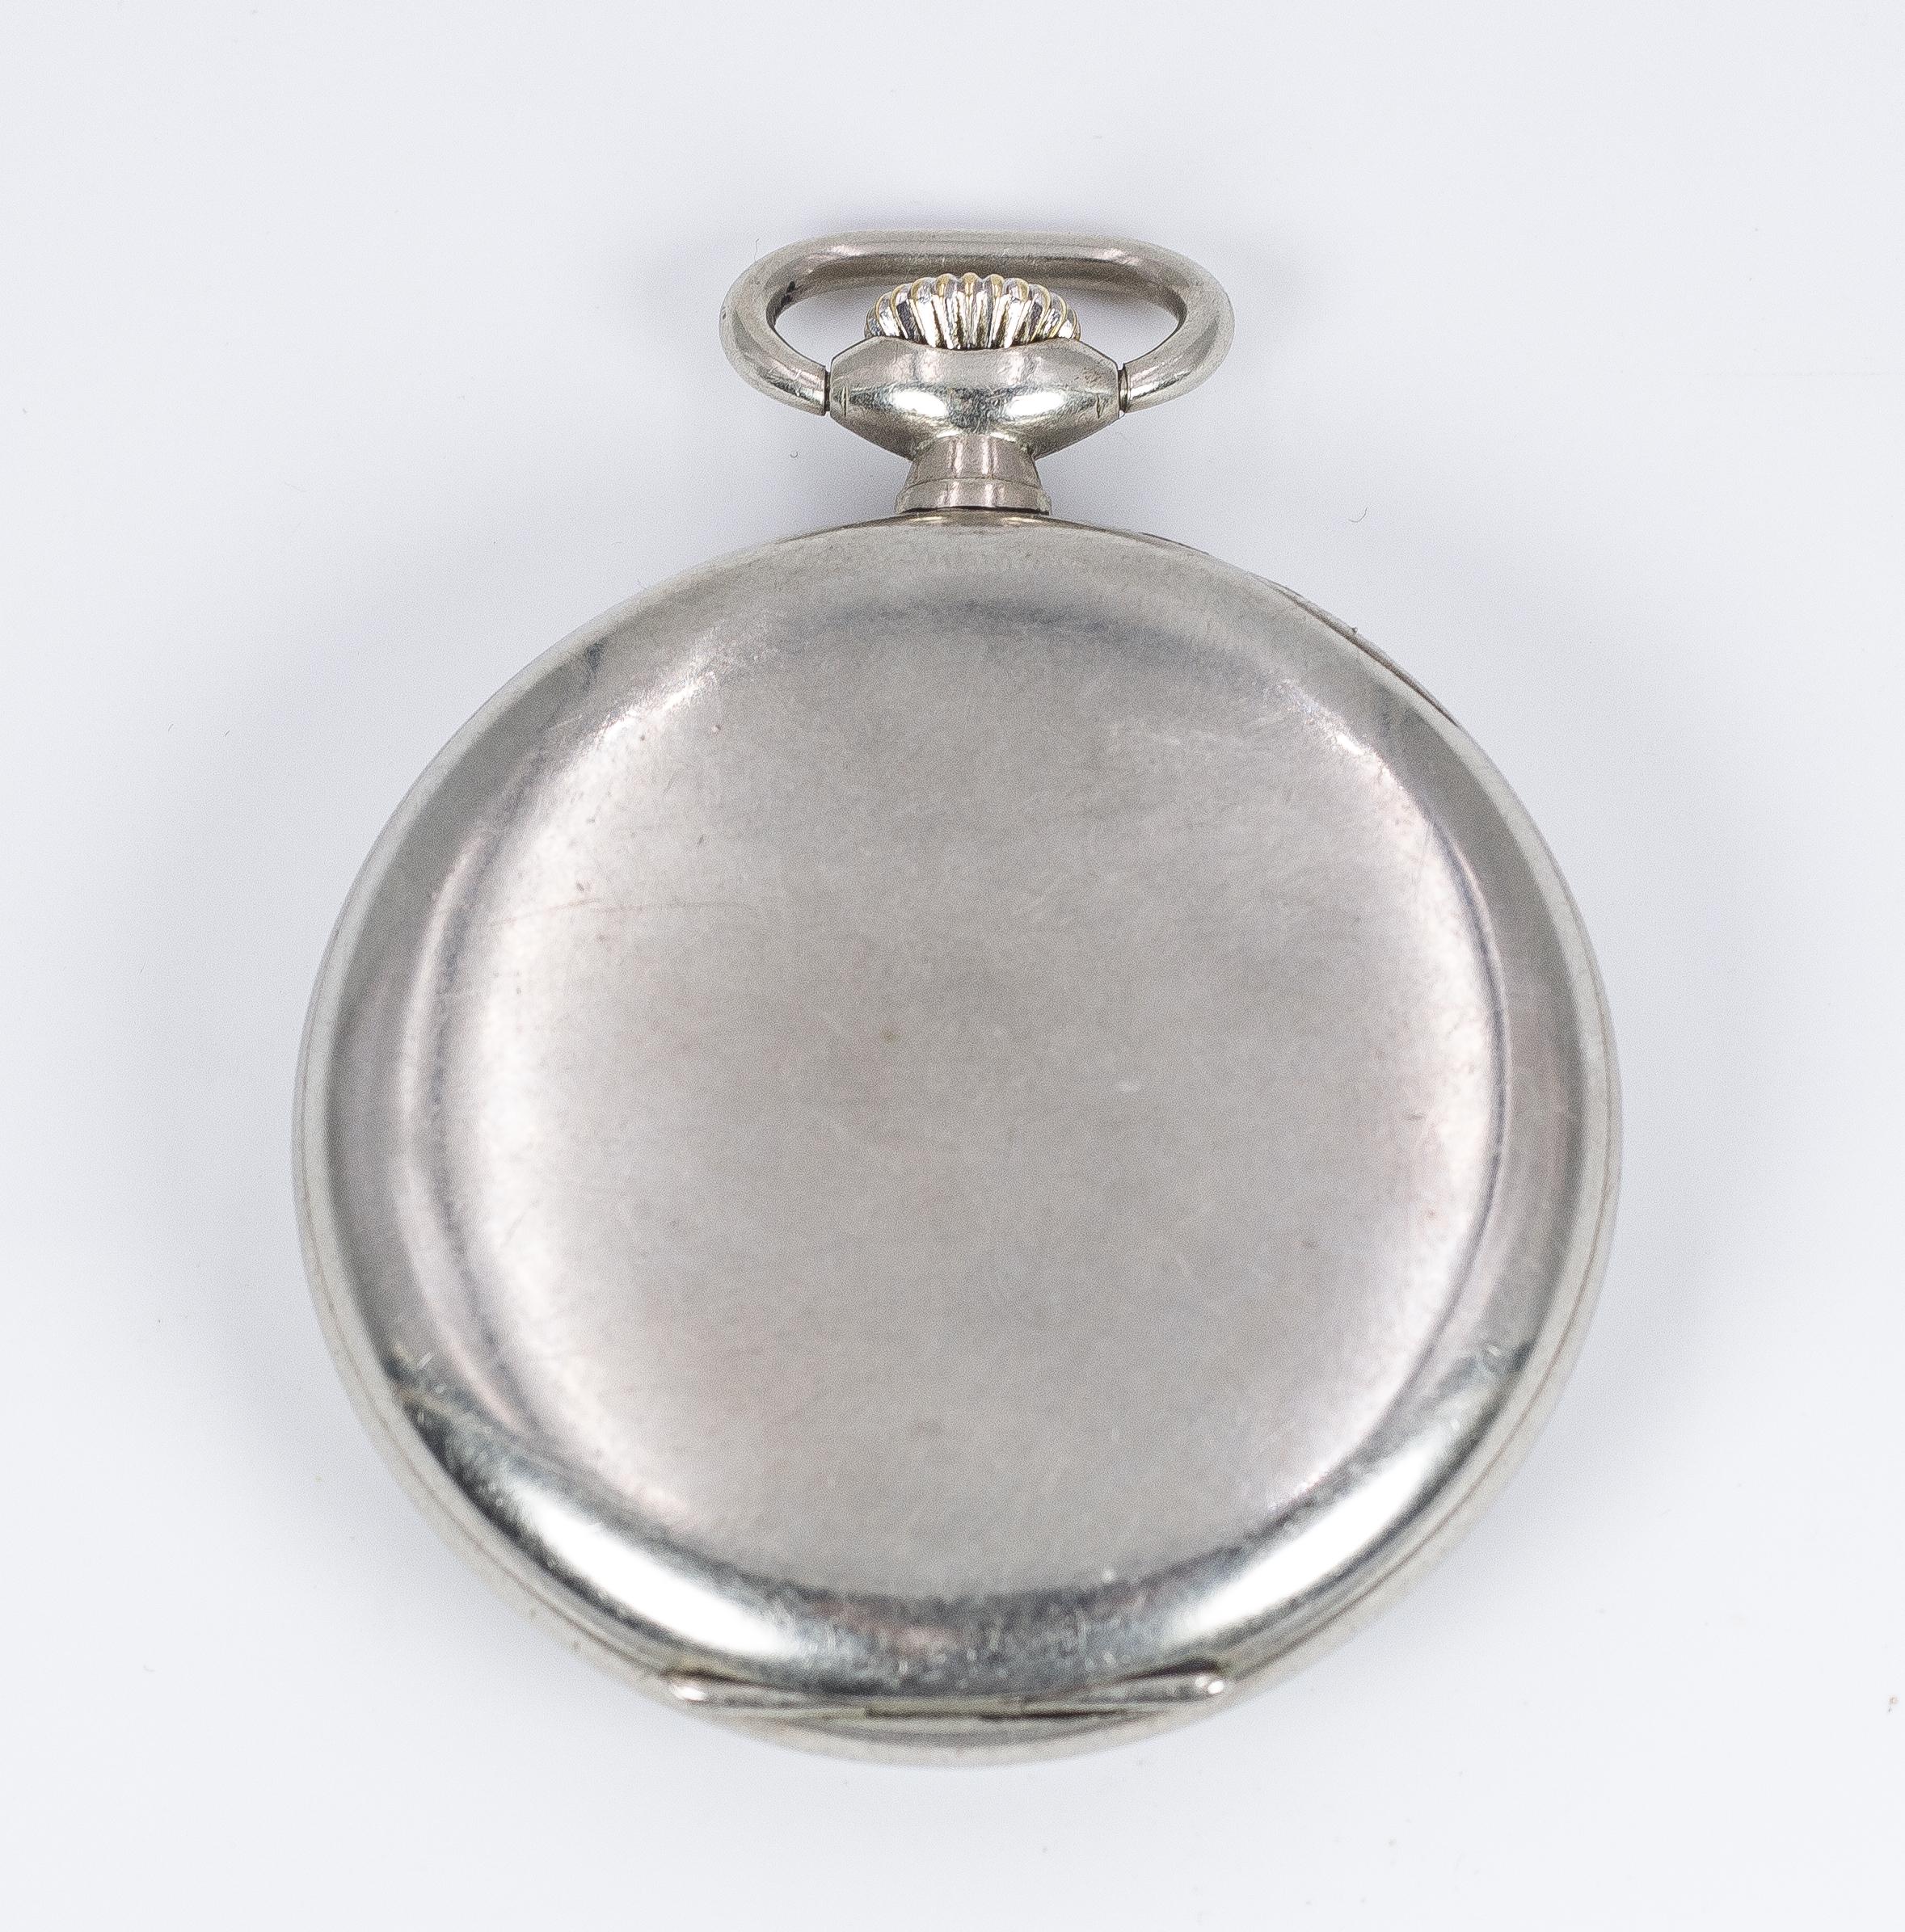 An antique steel Zenith pocket watch, dating from the early 20th Century. 

BRAND
Zenith

MATERIALS
Steel

MEASUREMENTS
Diameter: 49 mm